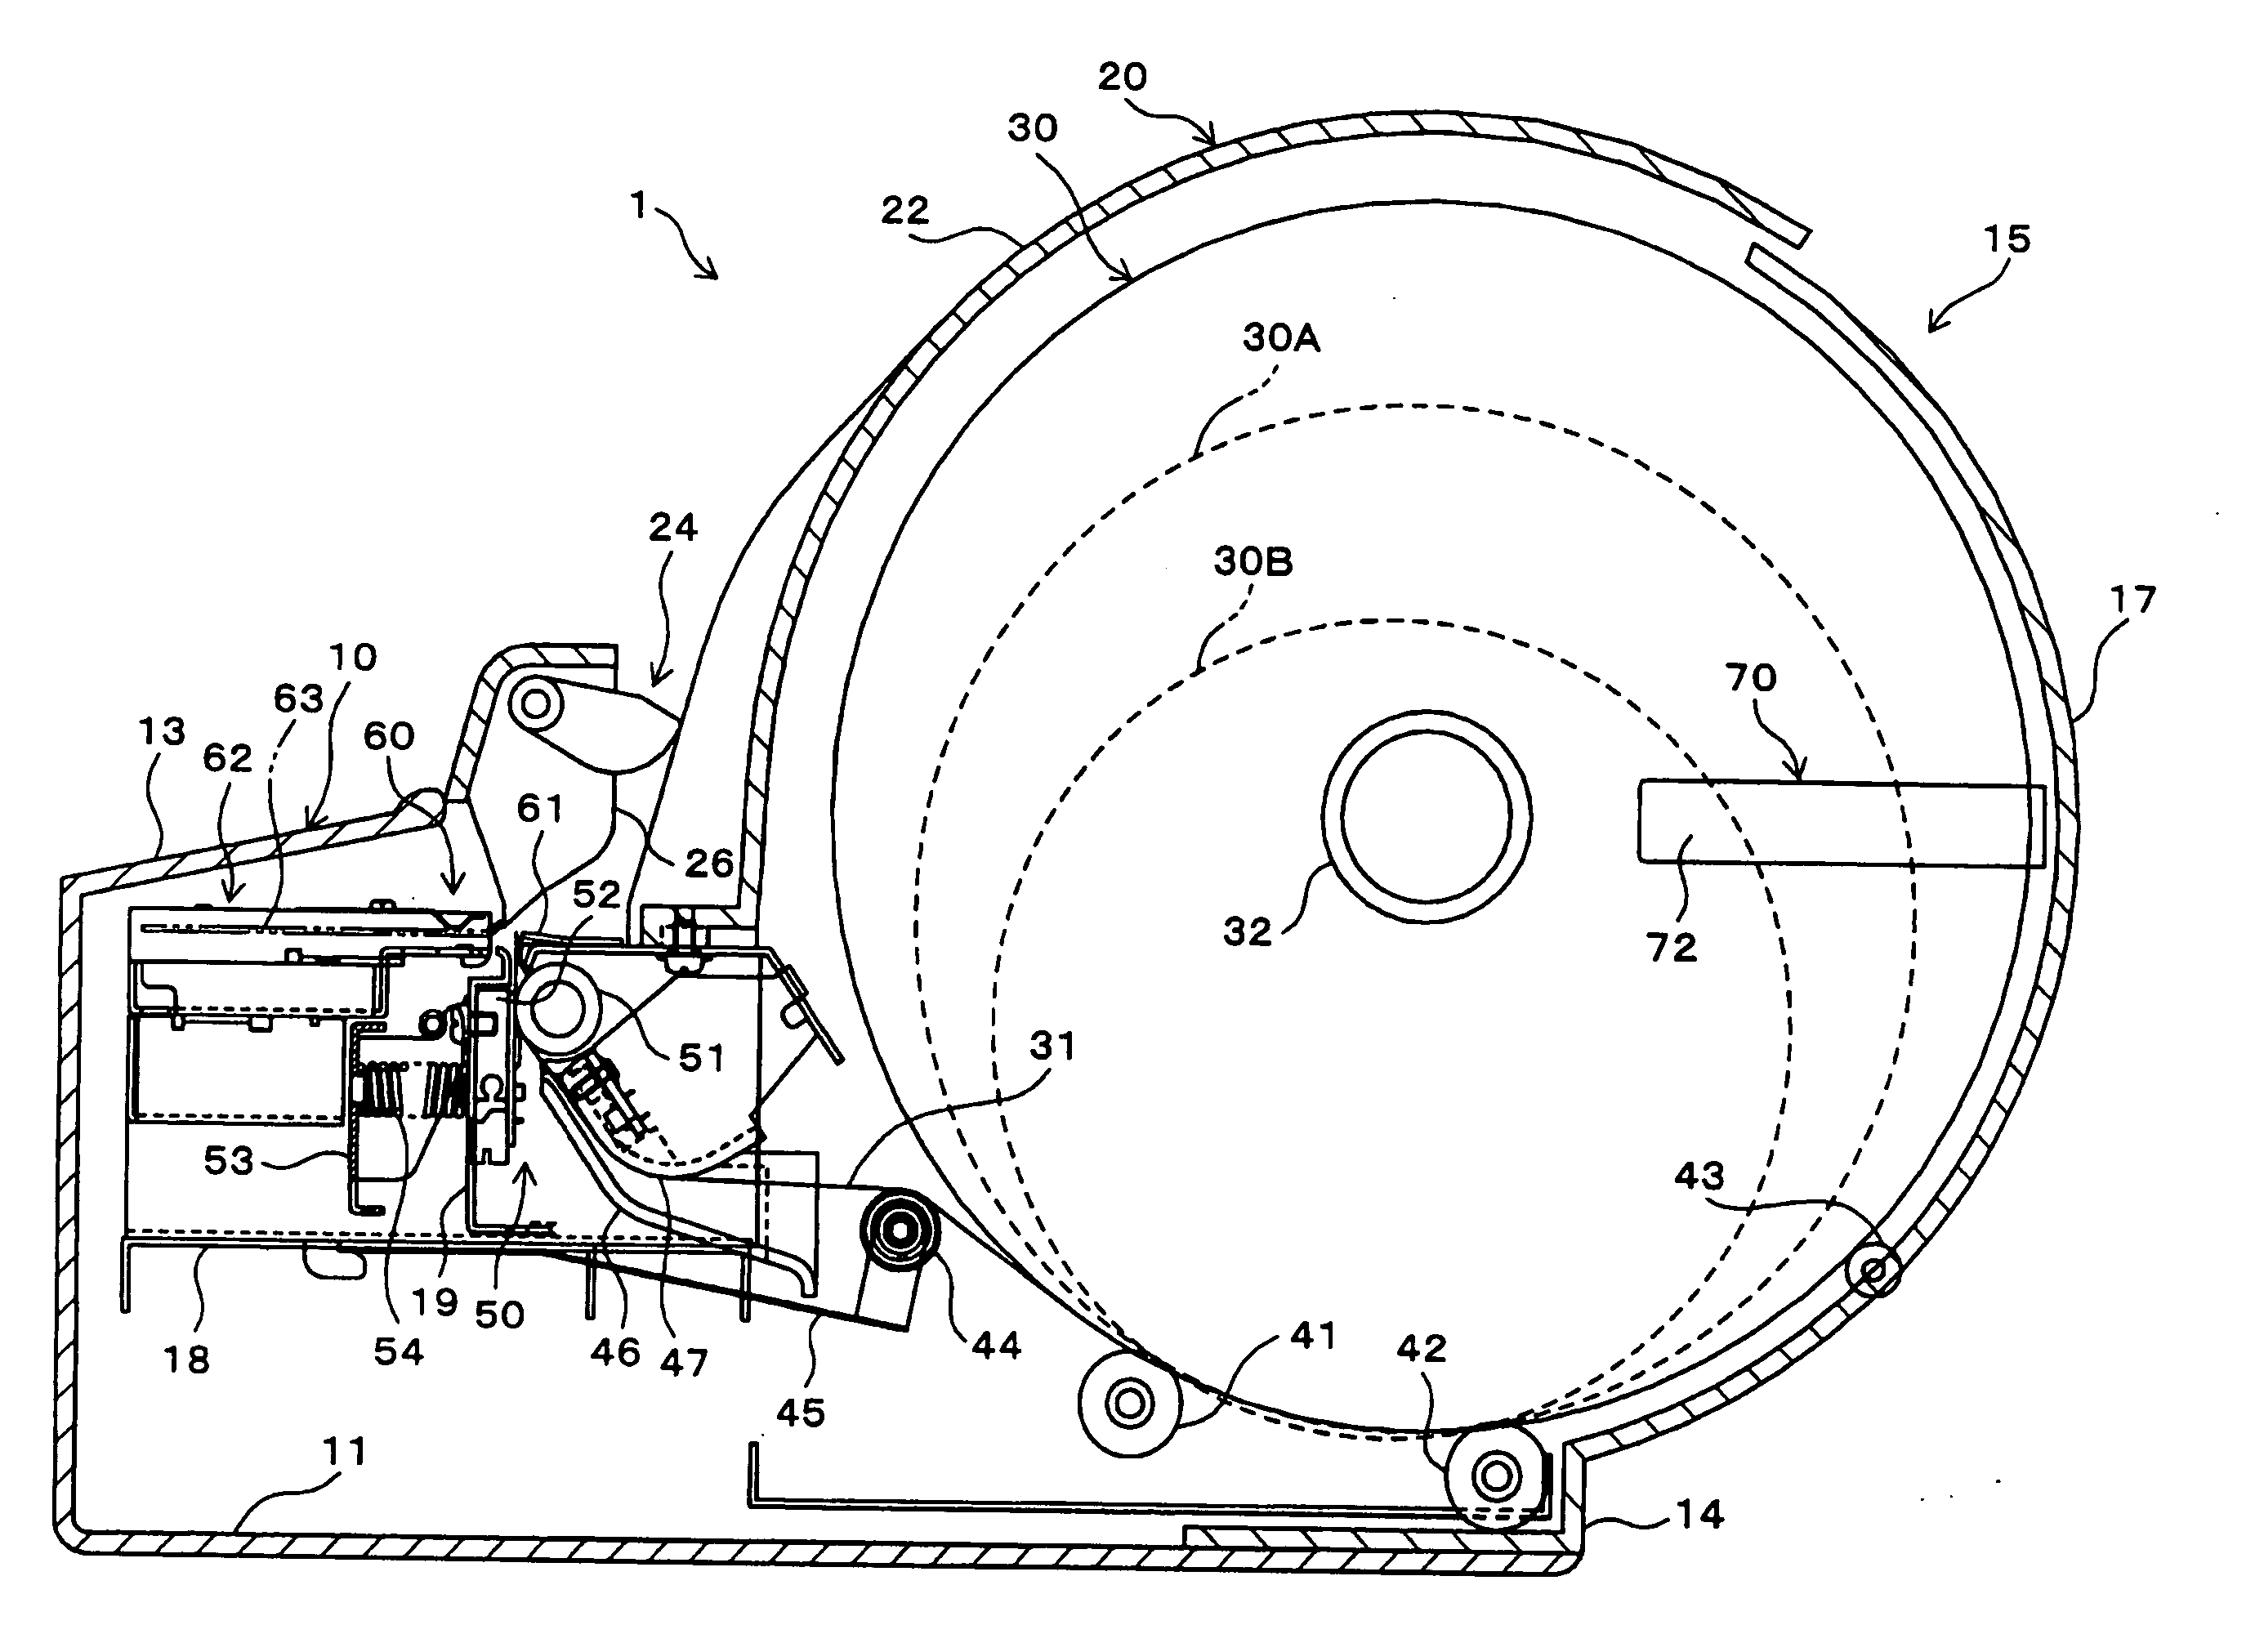 Roll paper holding mechanism and printer